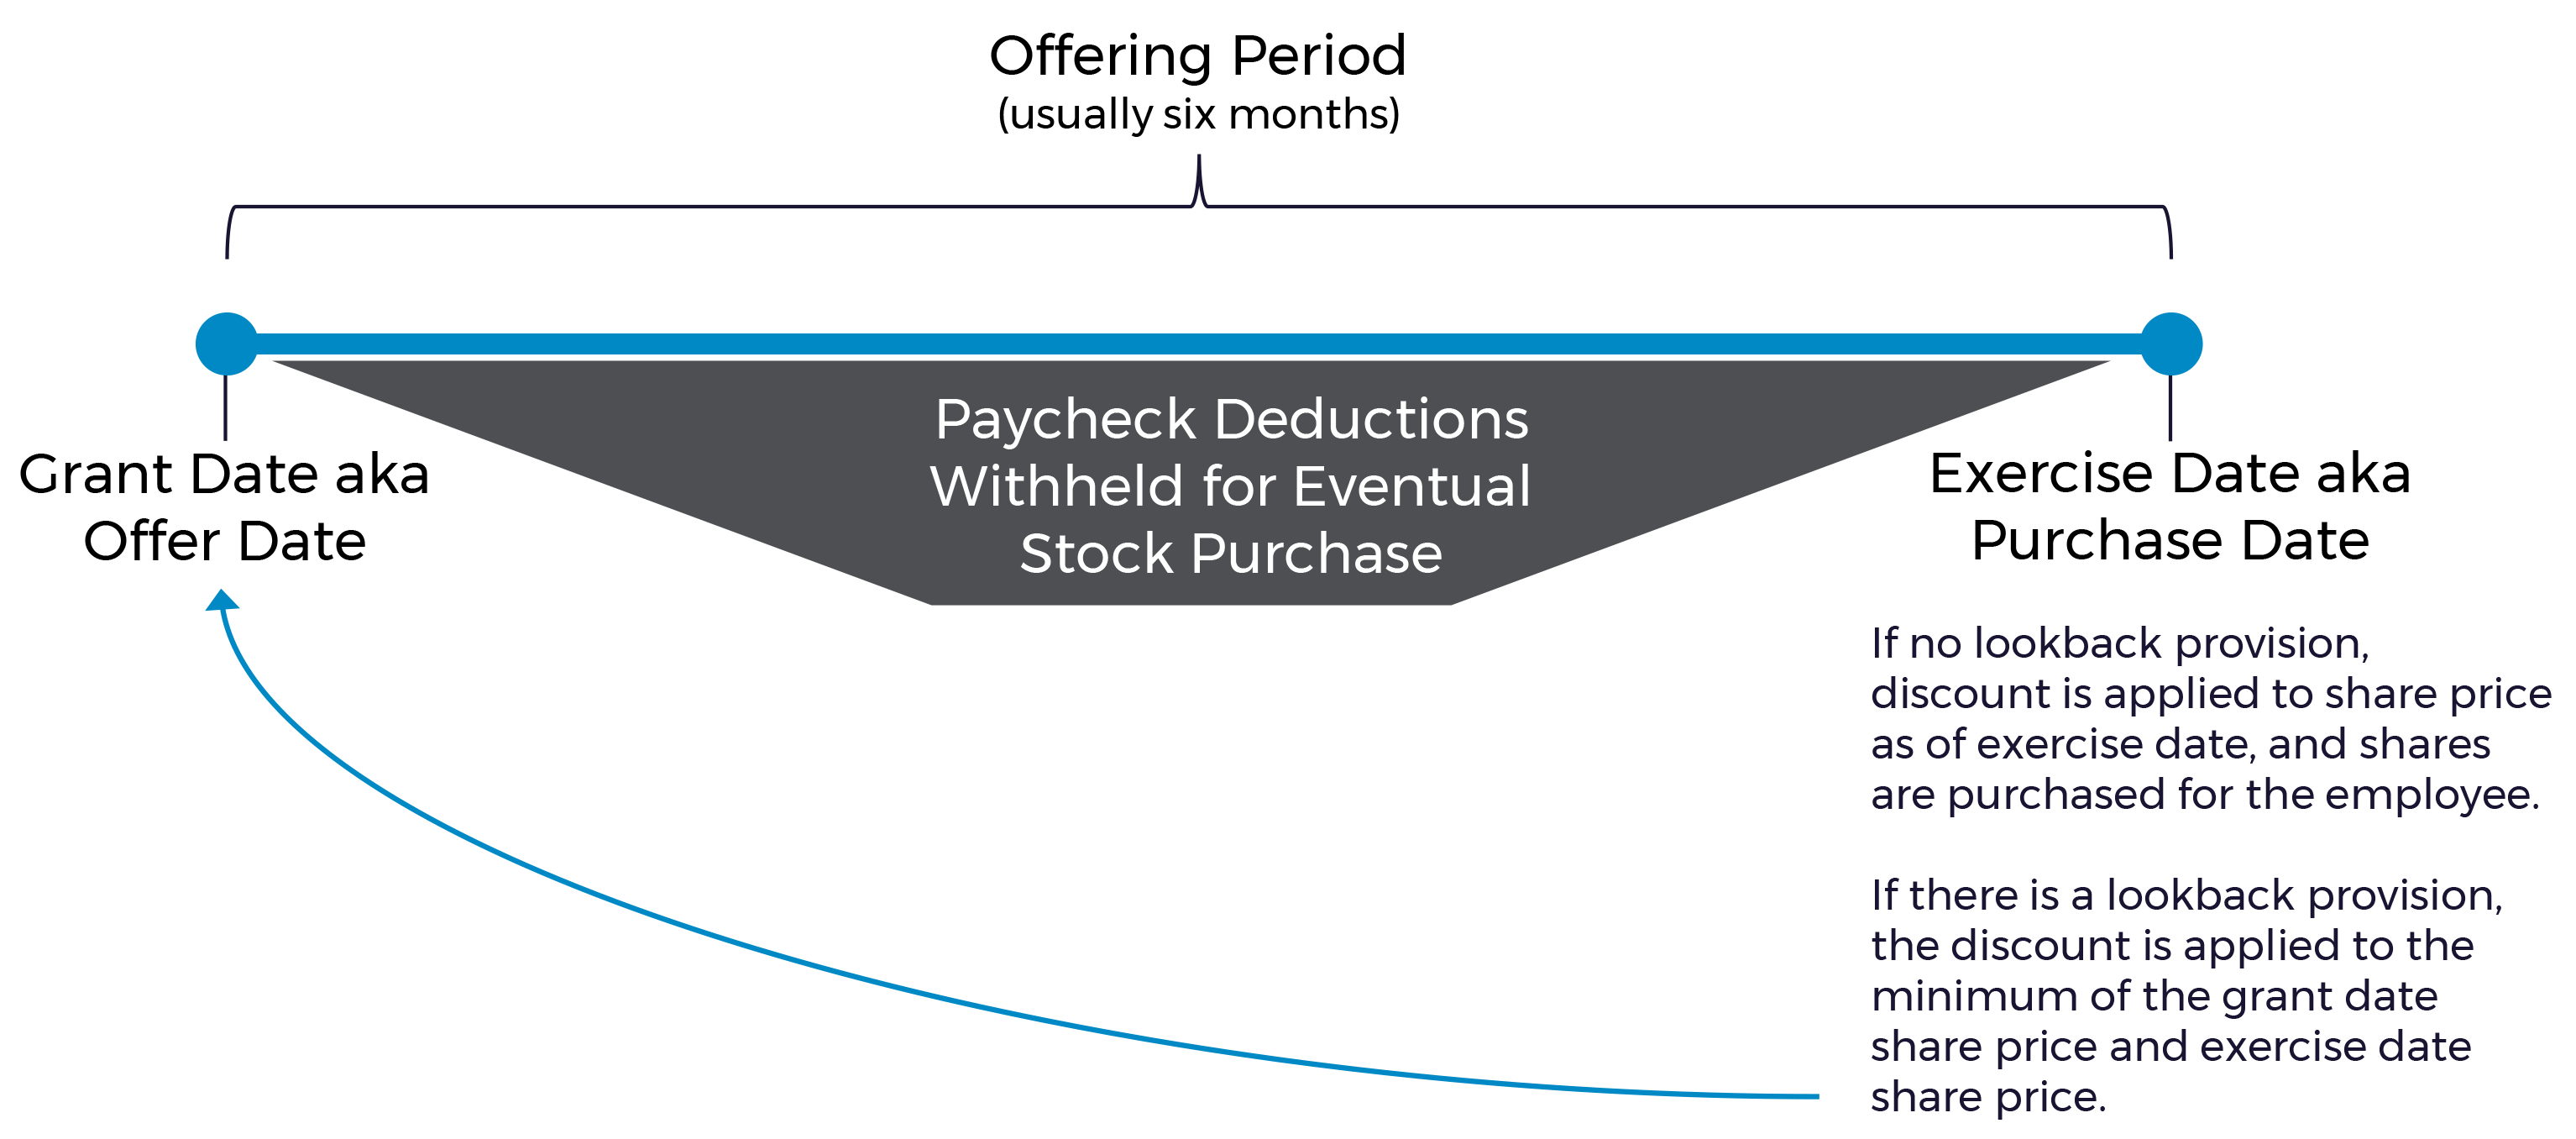 Paycheck Deductions Withheld for Eventual Stock Purchases Graphic